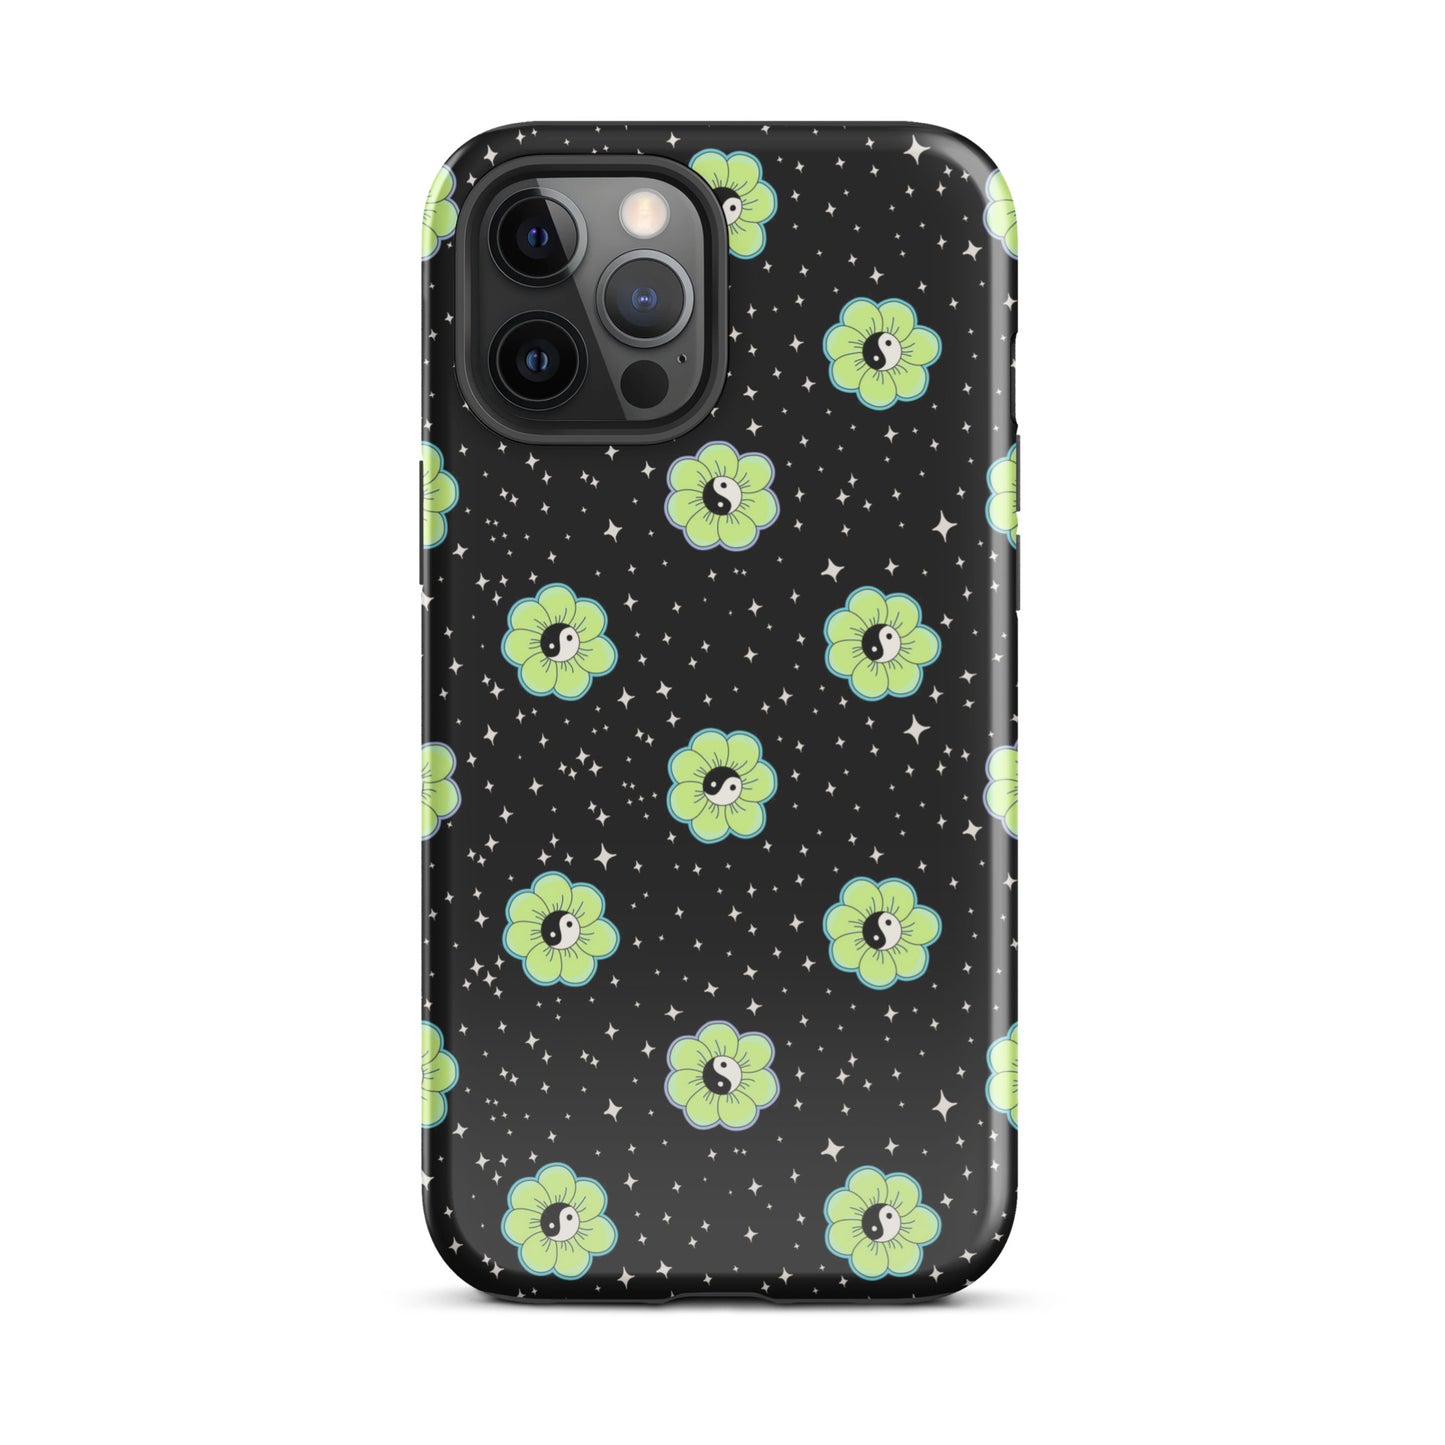 Yin & Yang Bloom iPhone Case iPhone 12 Pro Max Glossy